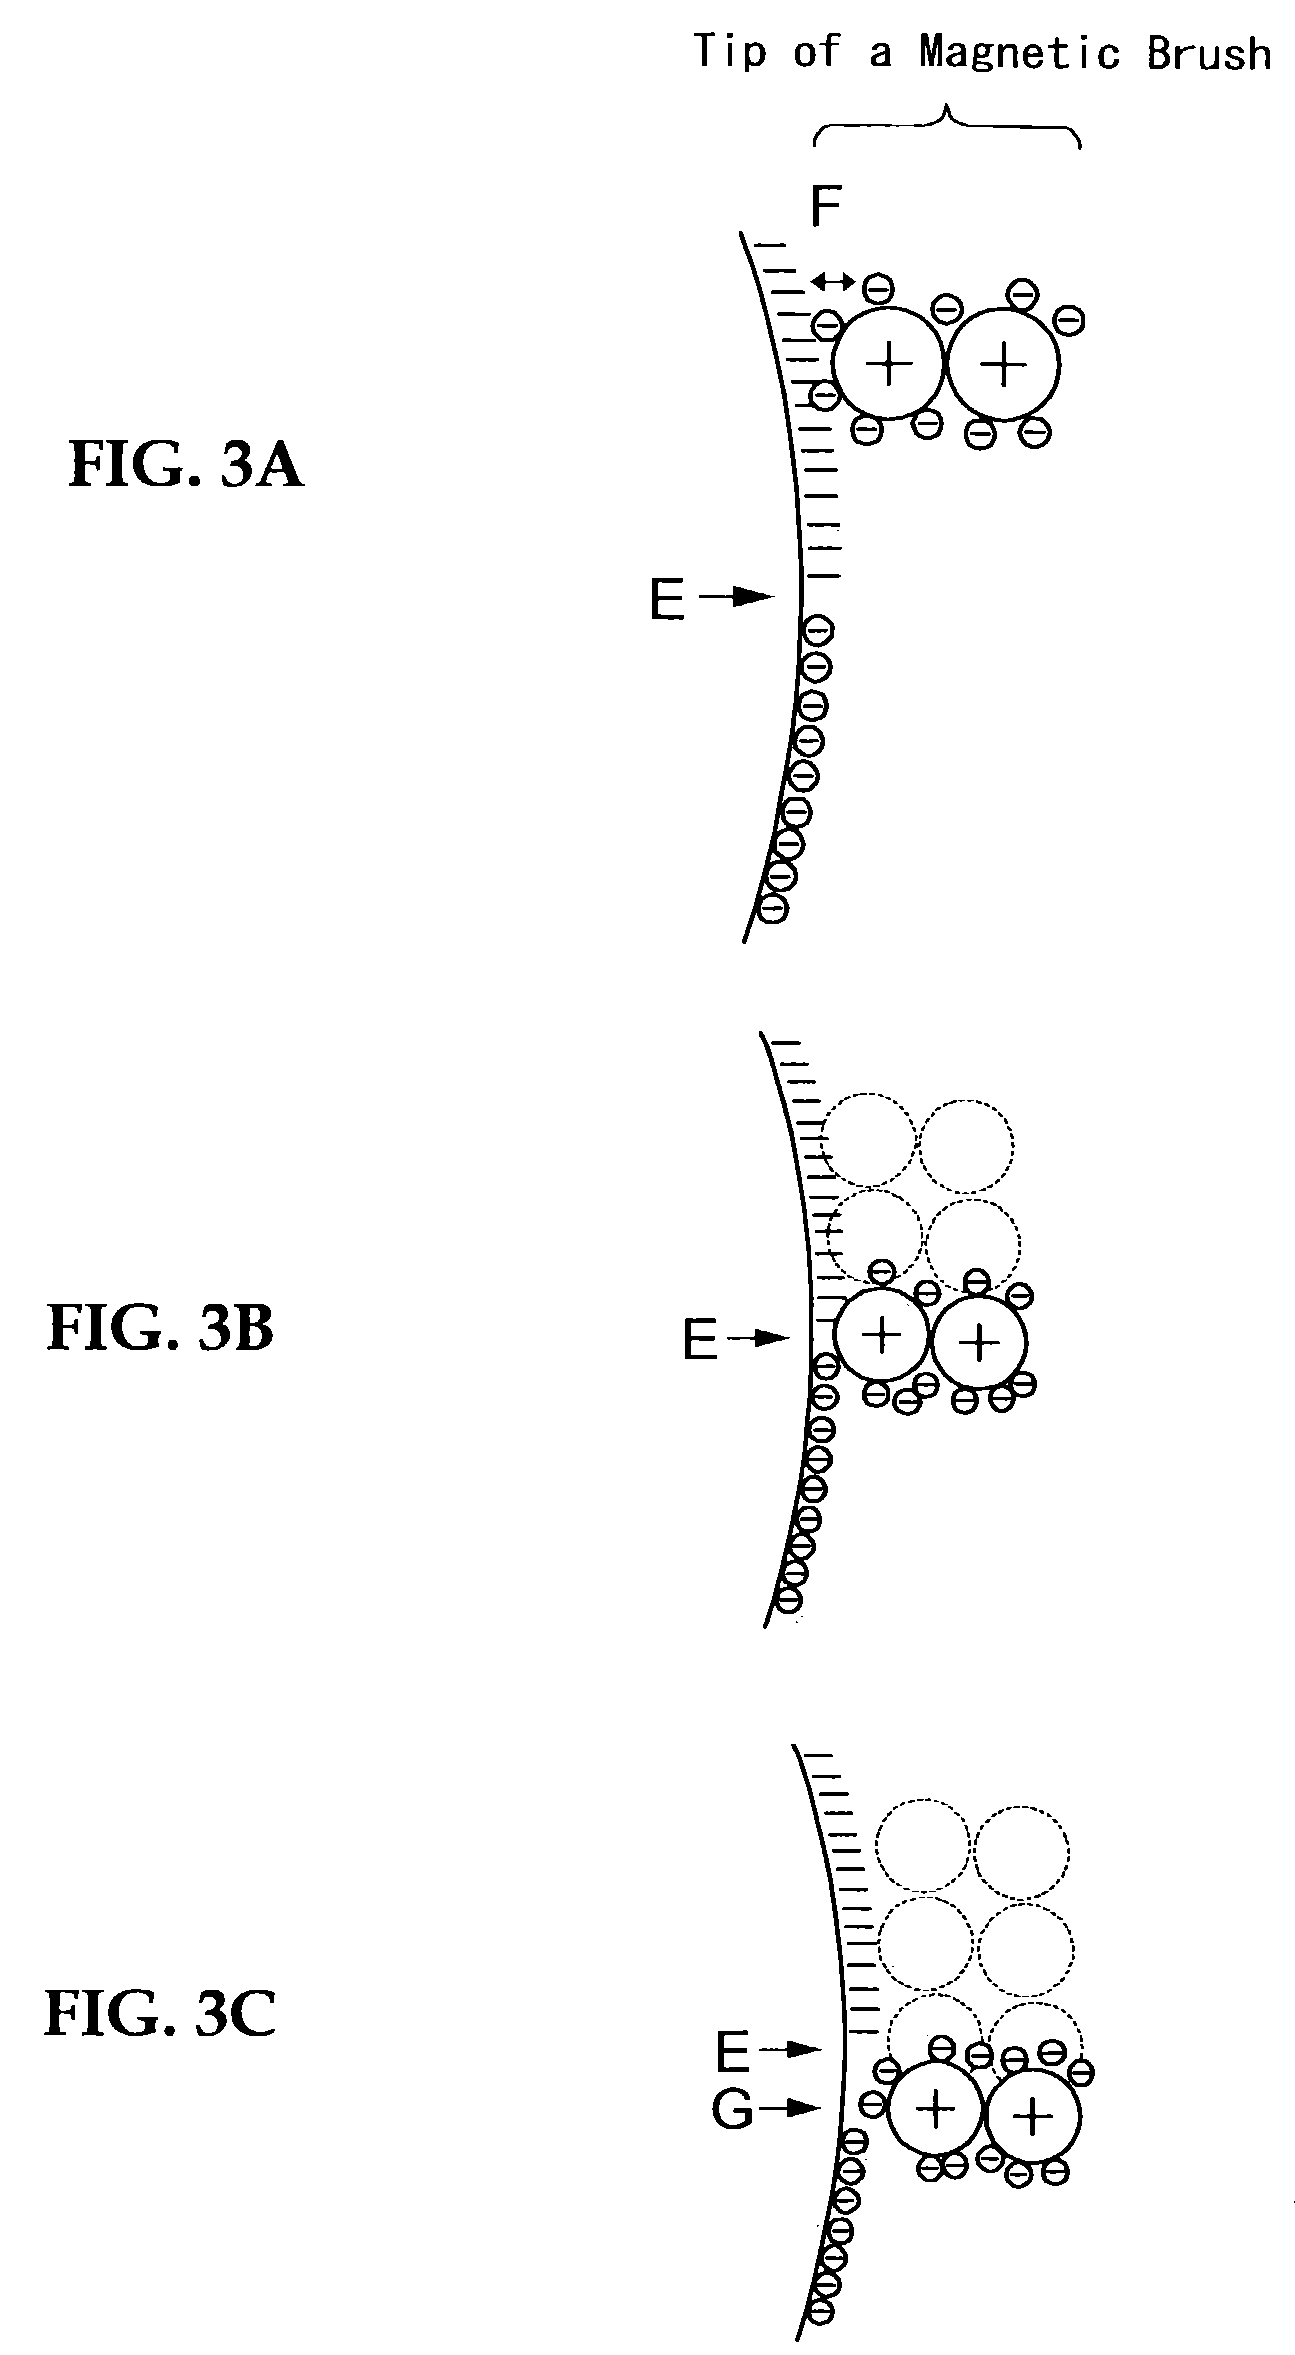 Toner for developing latent electrostatic image, container having the same, developer using the same, process for developing using the same, image-forming process using the same, image-forming apparatus using the same, and image-forming process cartridge using the same